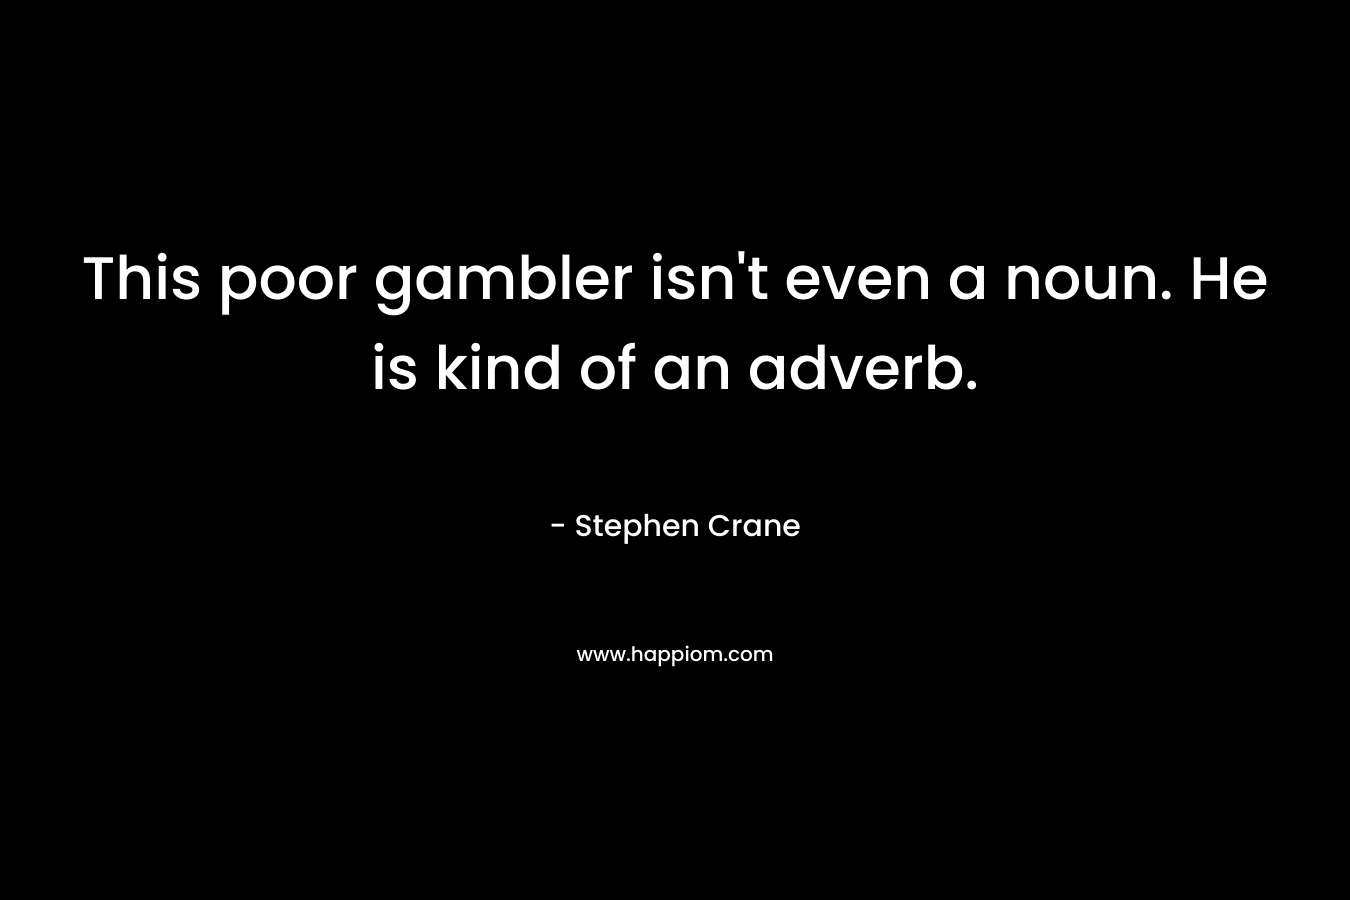 This poor gambler isn’t even a noun. He is kind of an adverb. – Stephen Crane